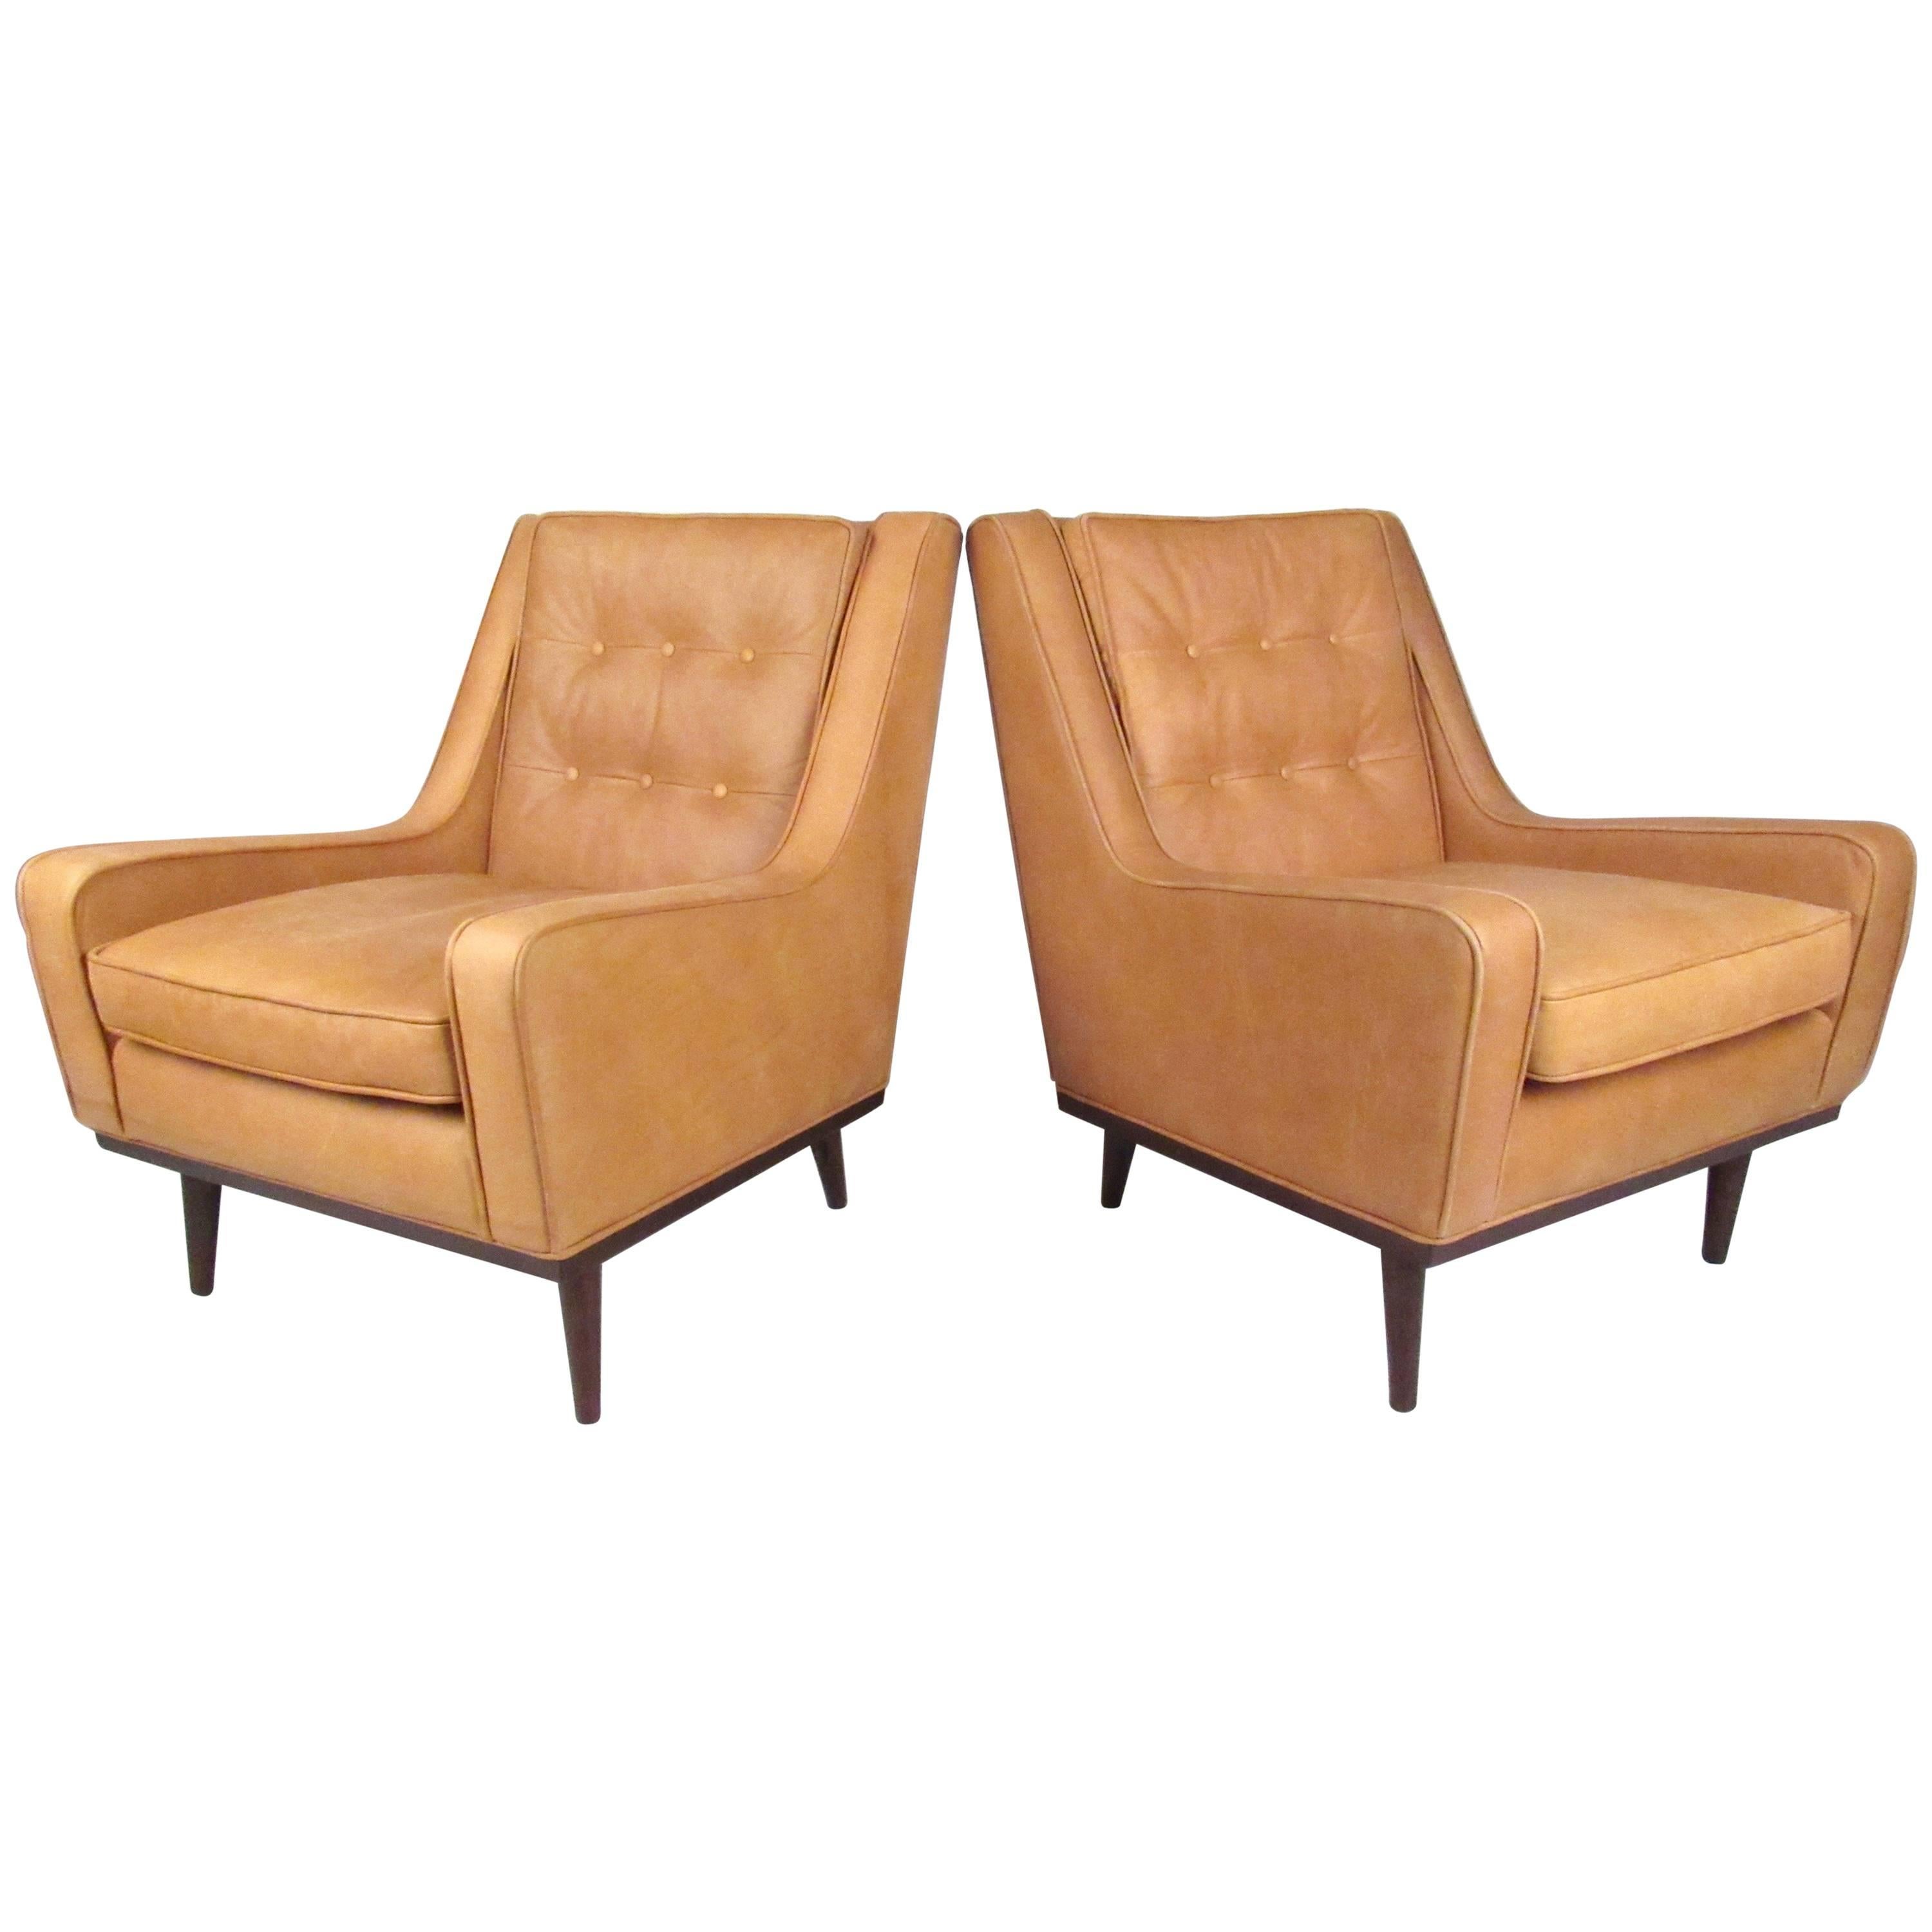 Pair of Stylish Modern Tufted Leather Lounge Chairs